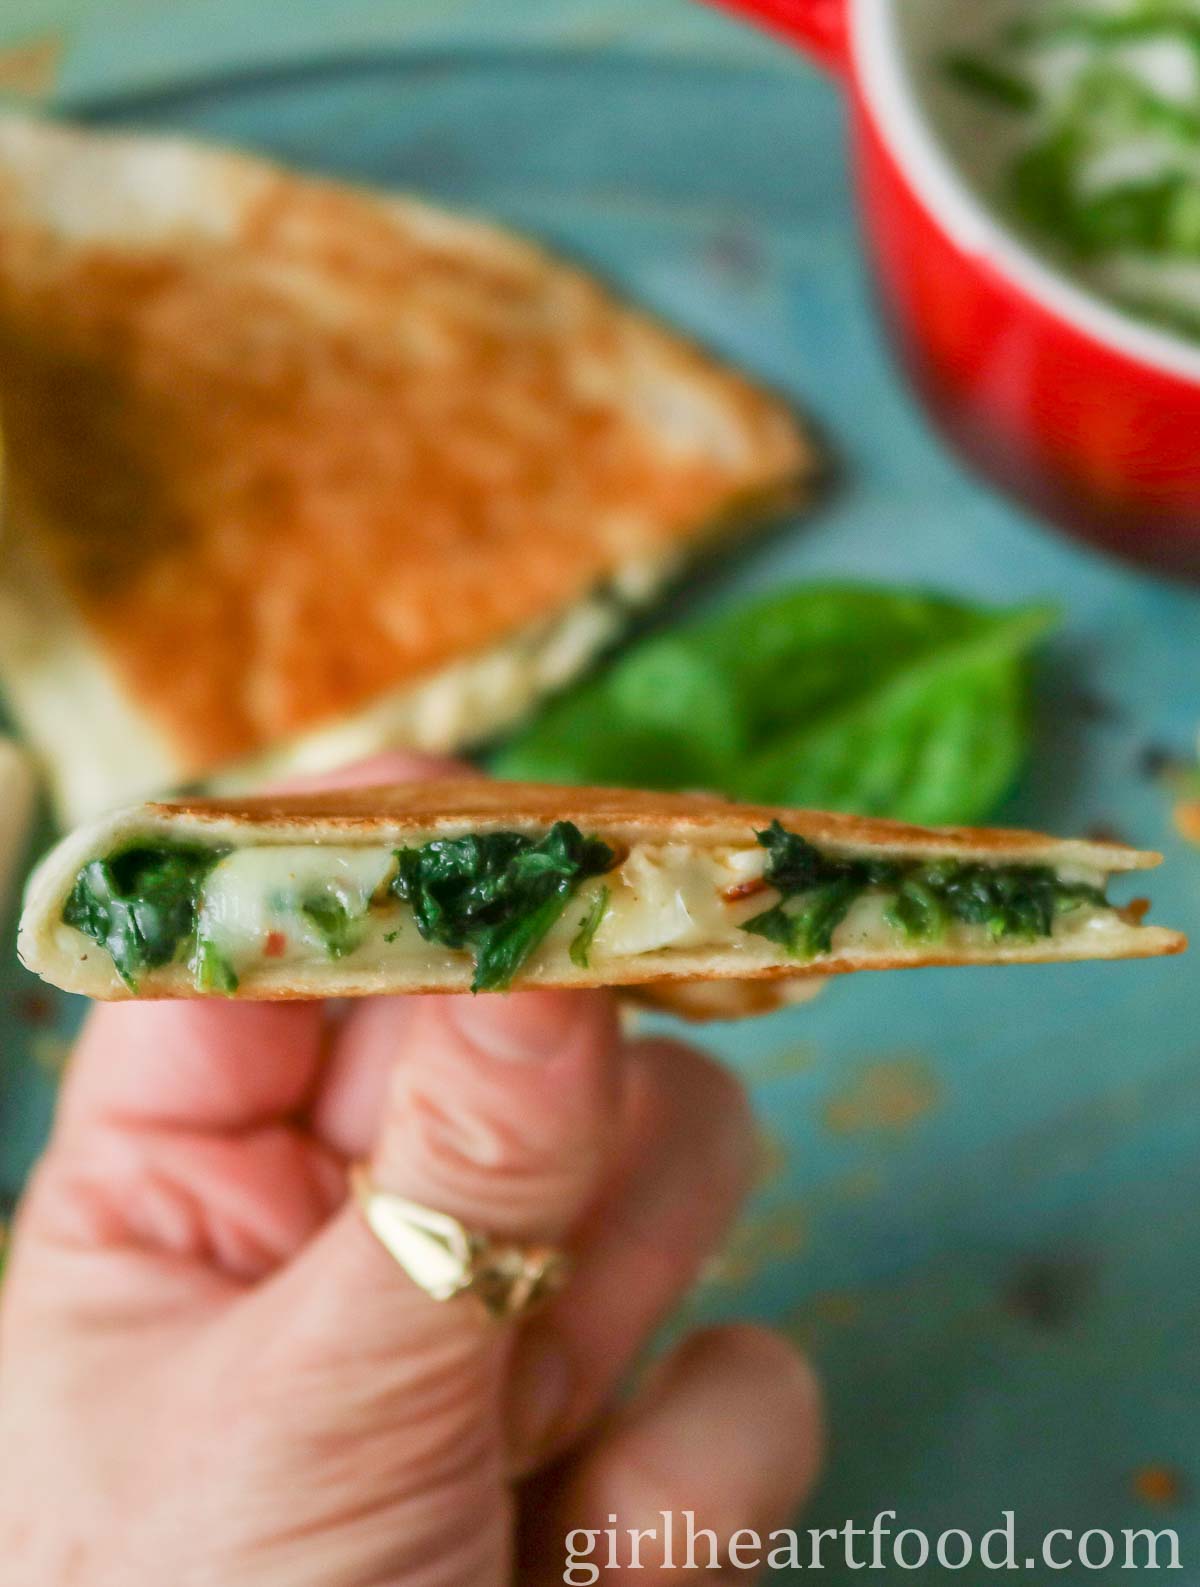 Hand holding a quesadilla made with spinach and cheese.